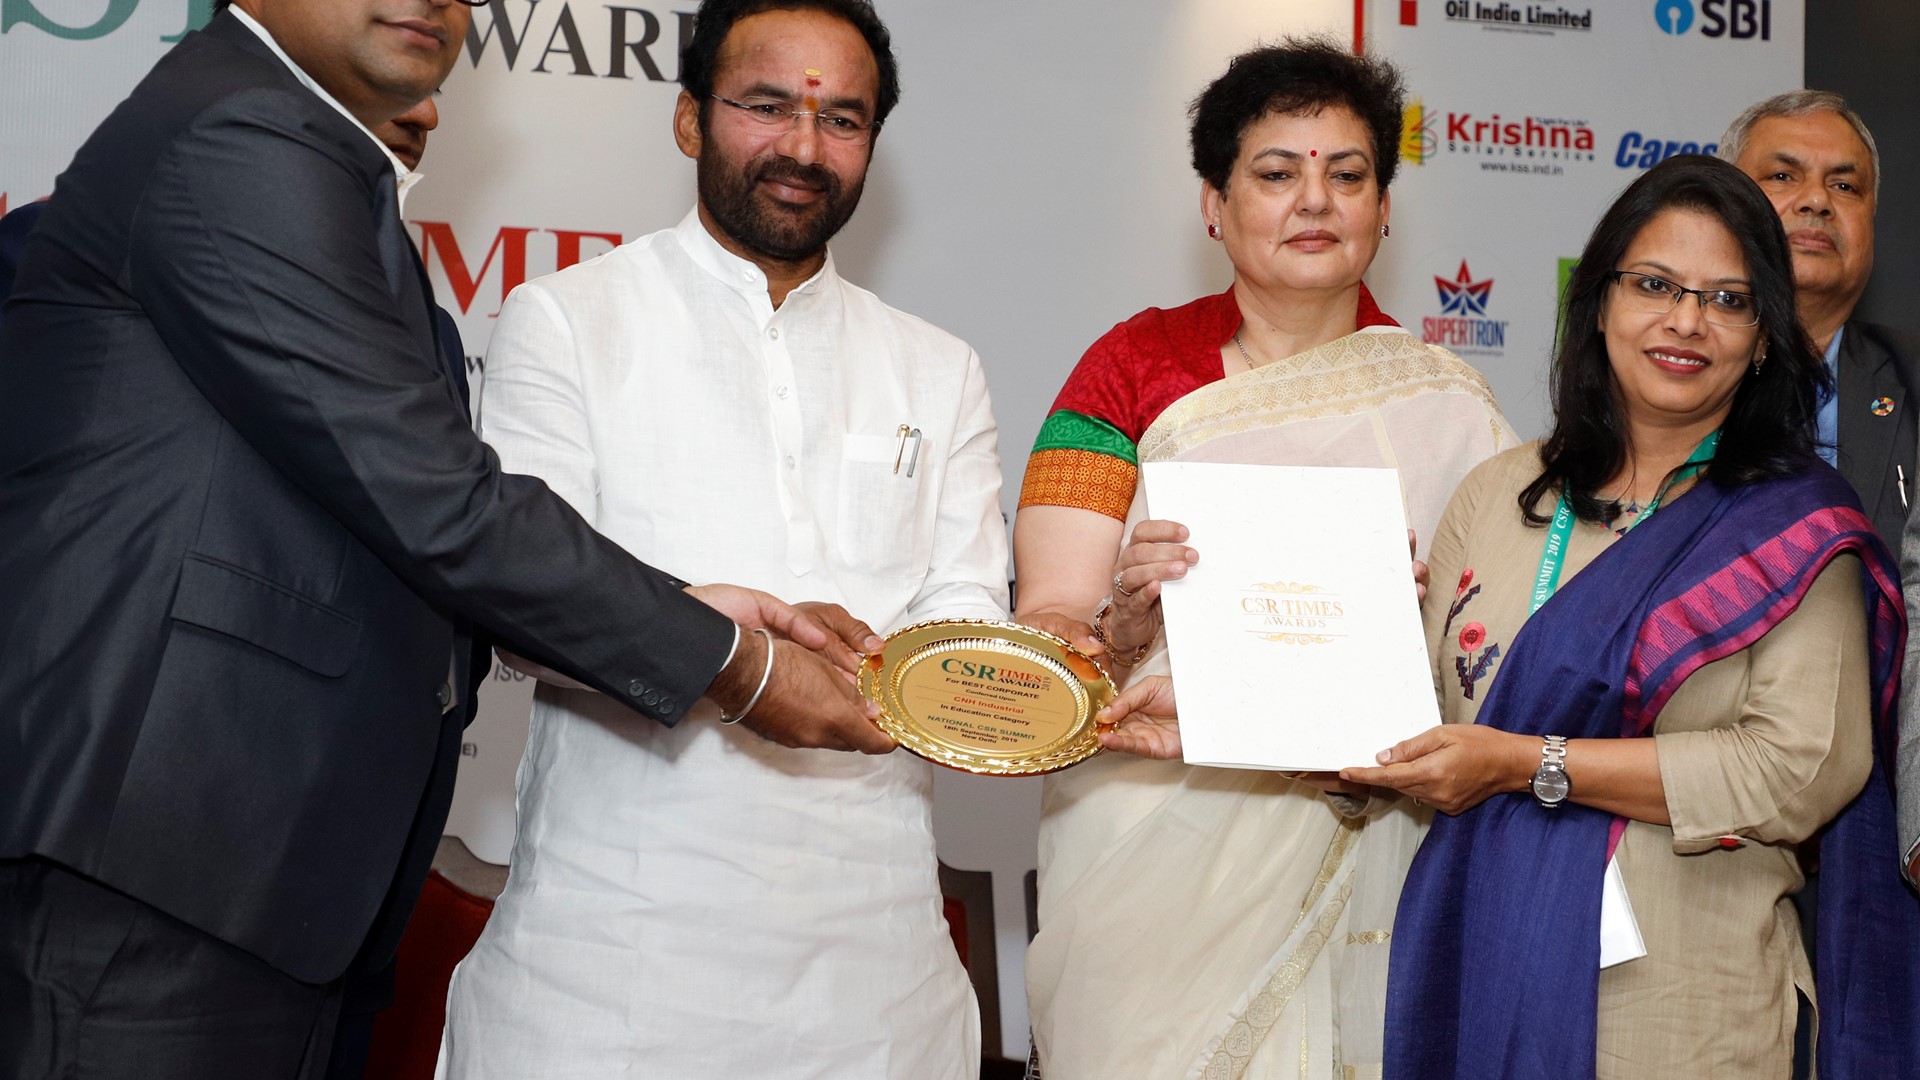 Mr. G. Kishan Reddy, Minister of State for Home Affairs (at center) presents CSR Times Award to CNH Industrial